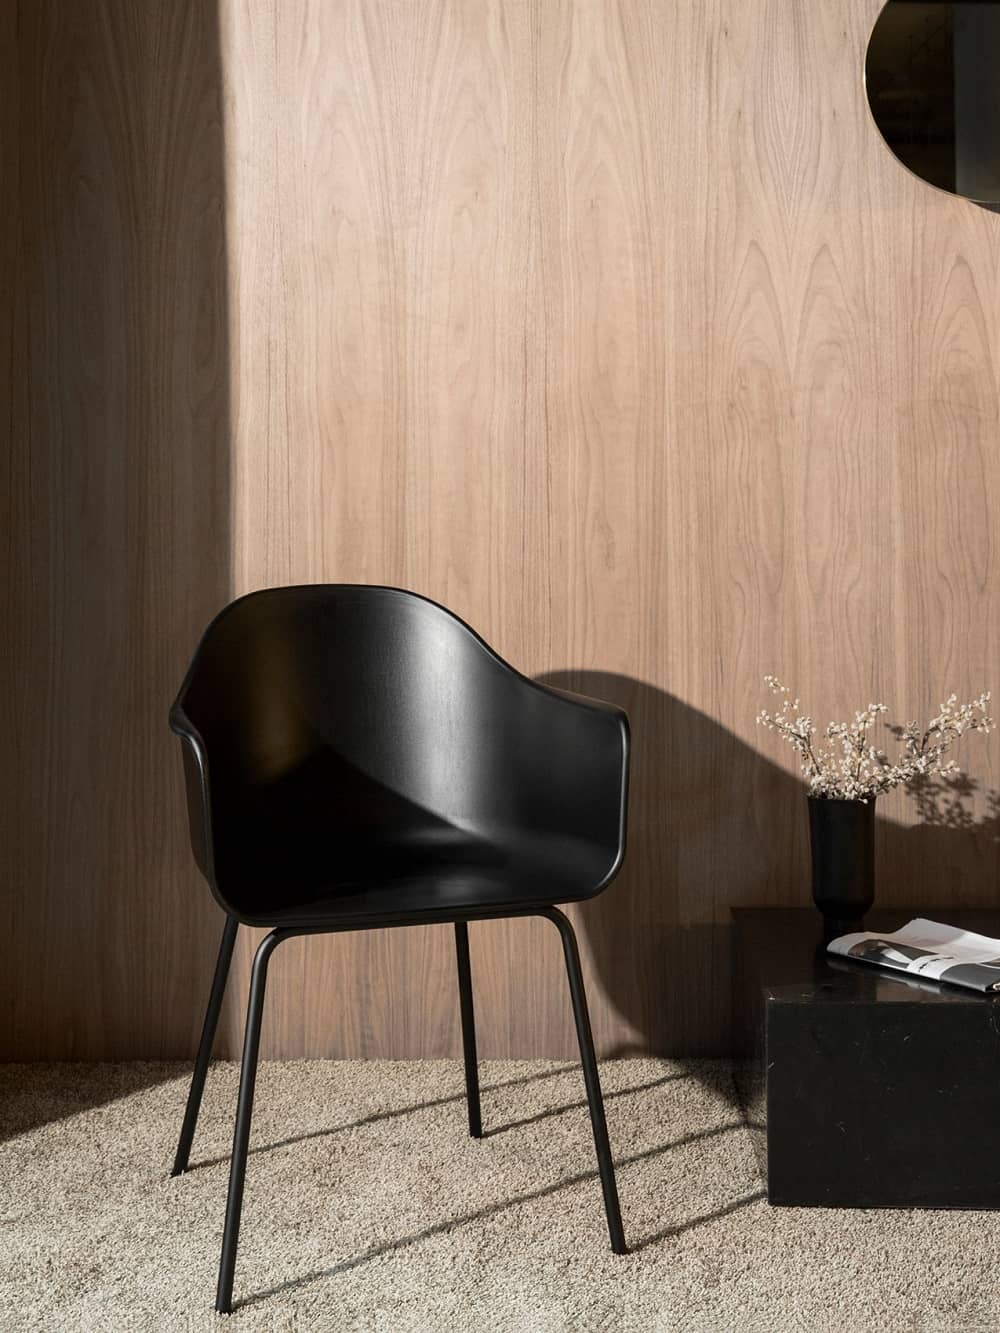 Harbour Chair Designed by Norm Architects